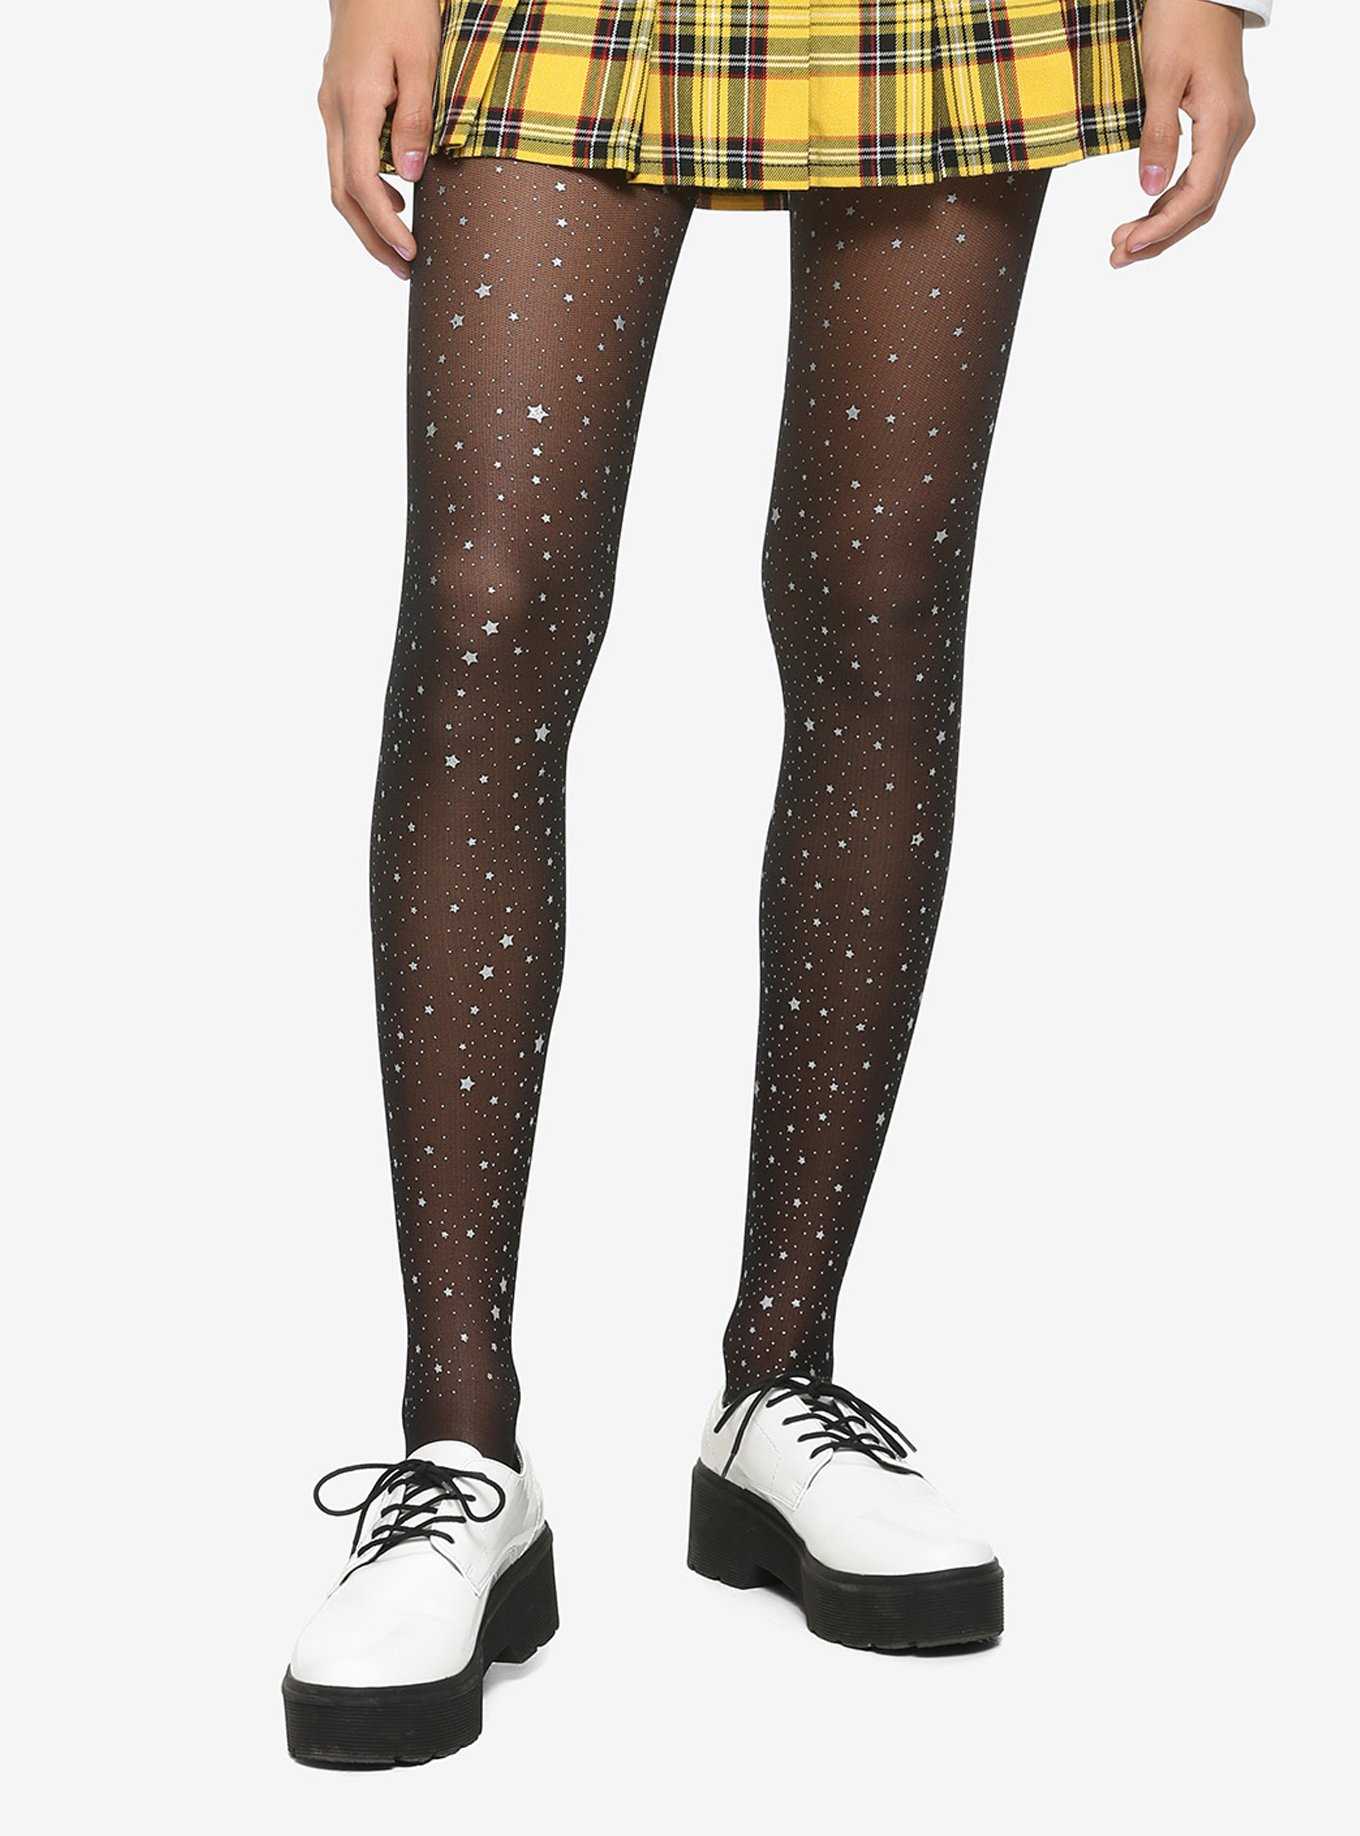 Red star tights with gold or silver print - Virivee Tights